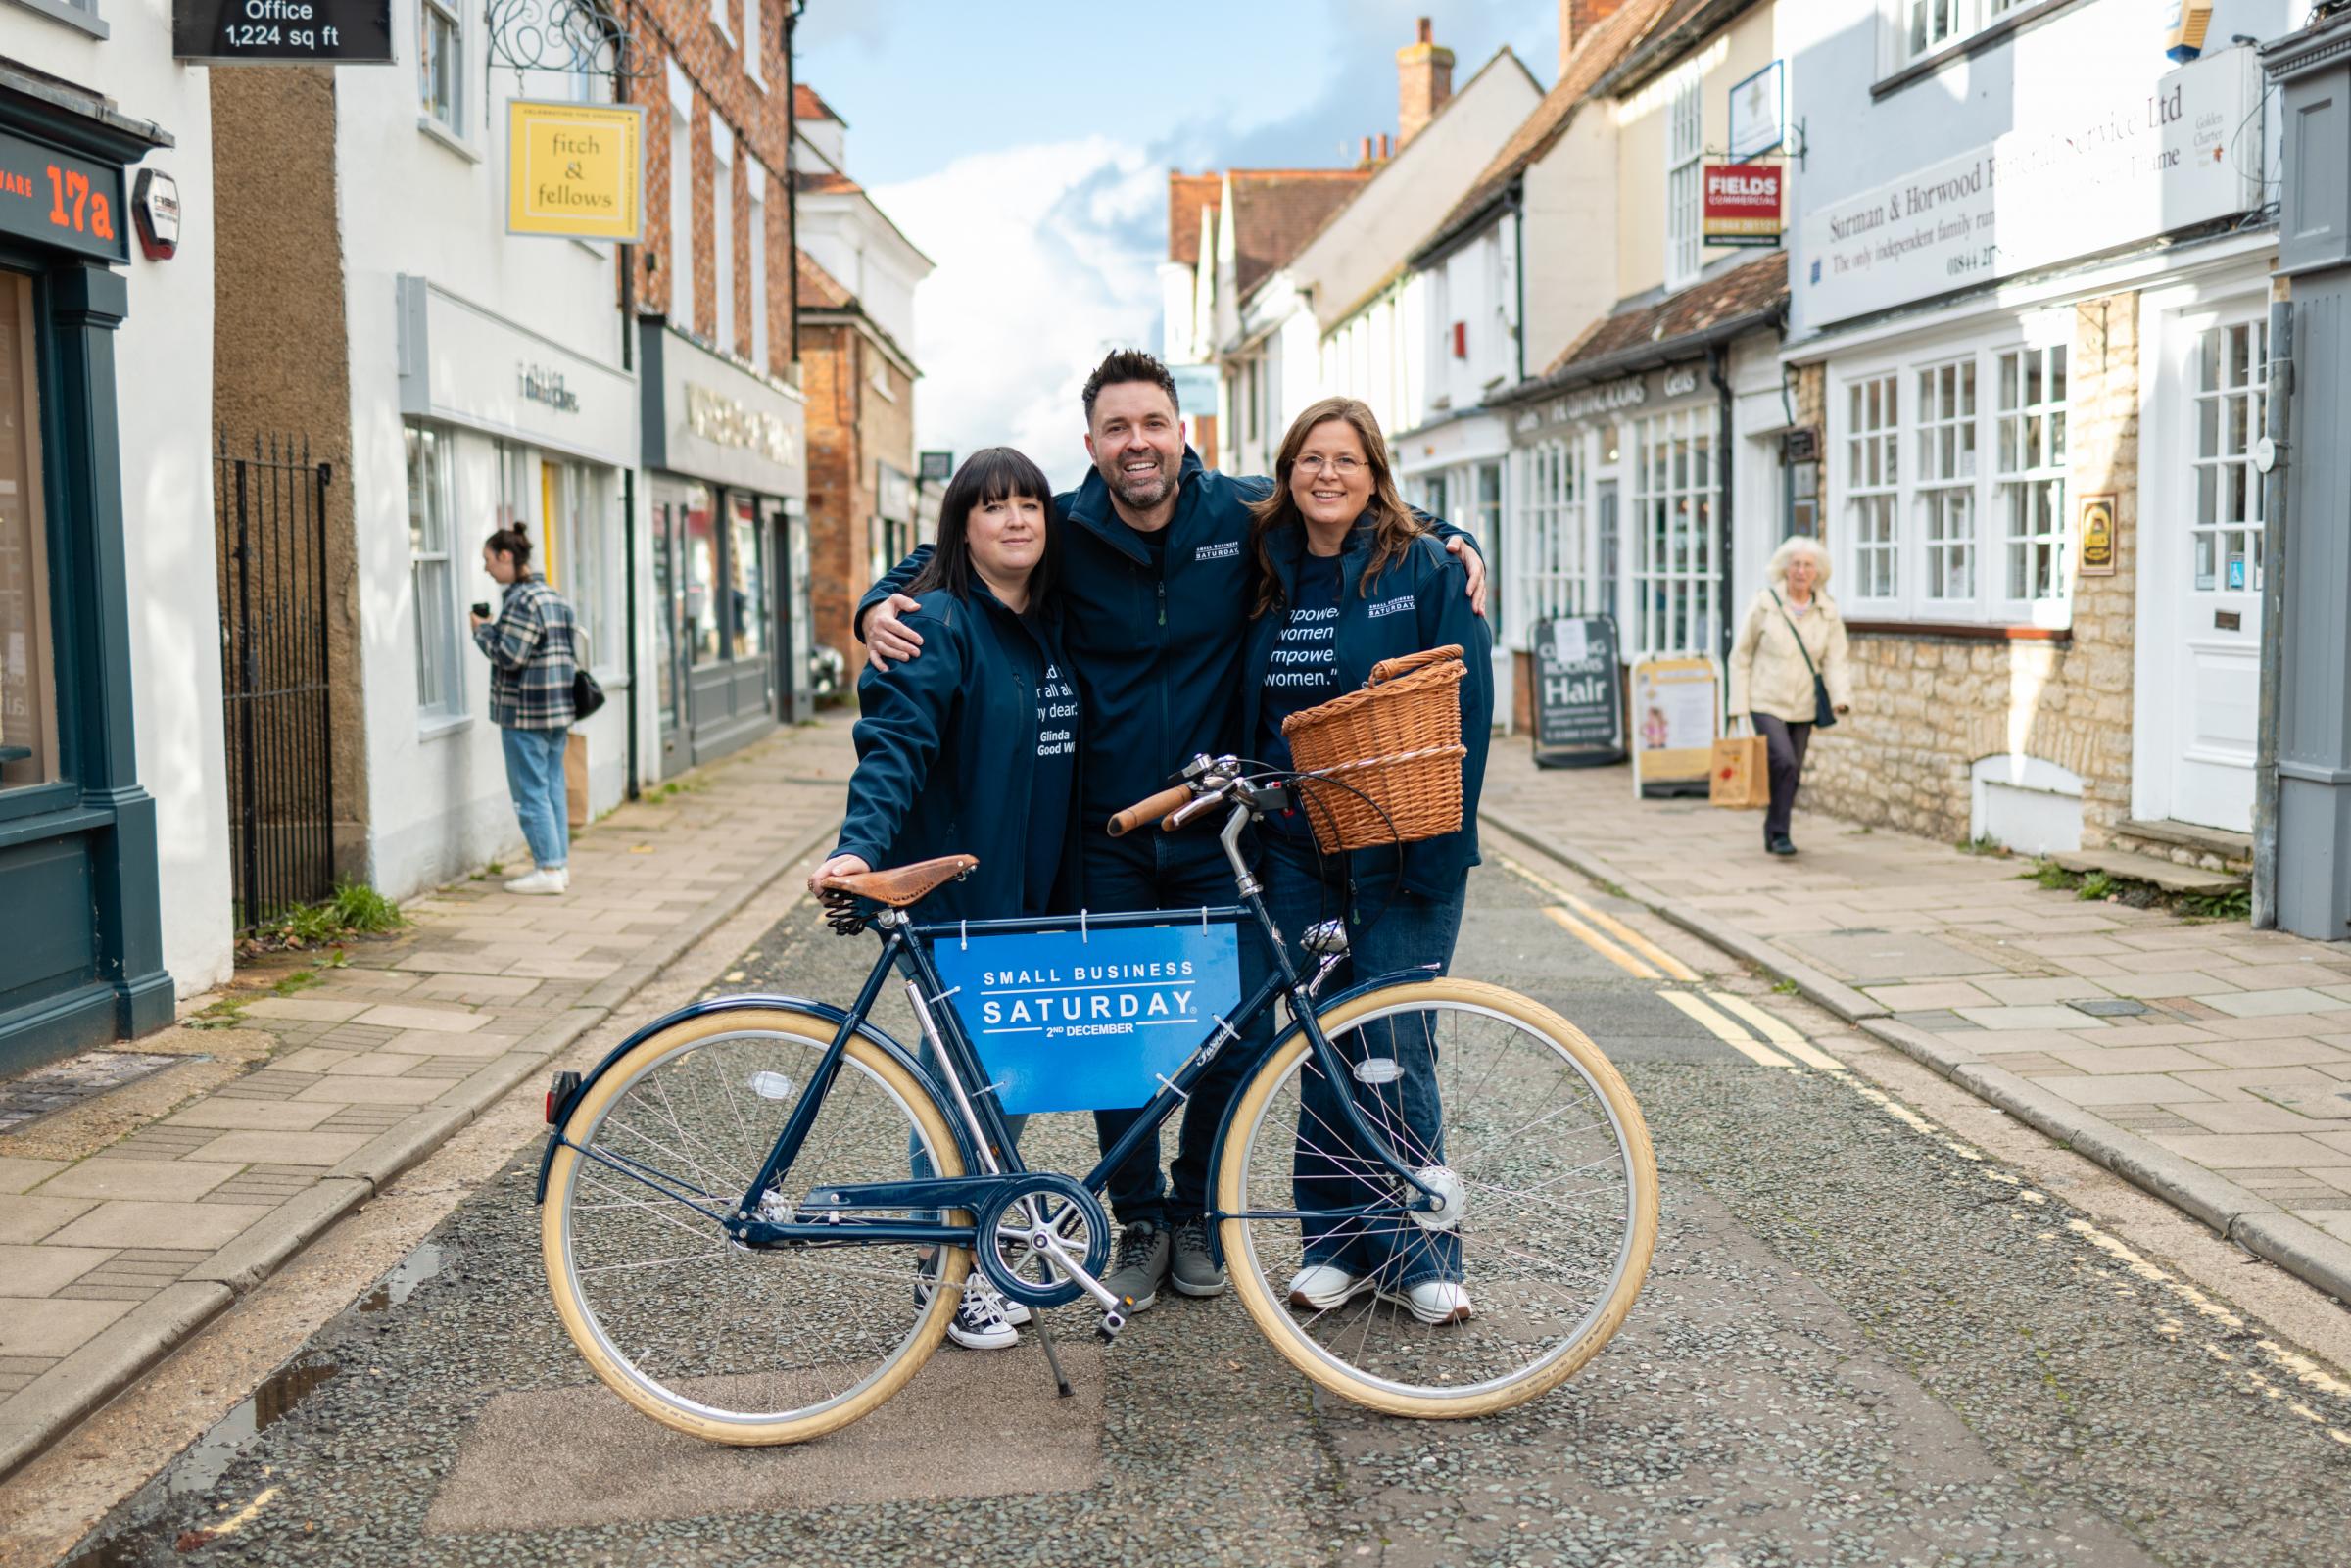 The Small Business Saturday team, including director Michelle Ovens, get ready to start a month-long roadshow to support small businesses across the UK.